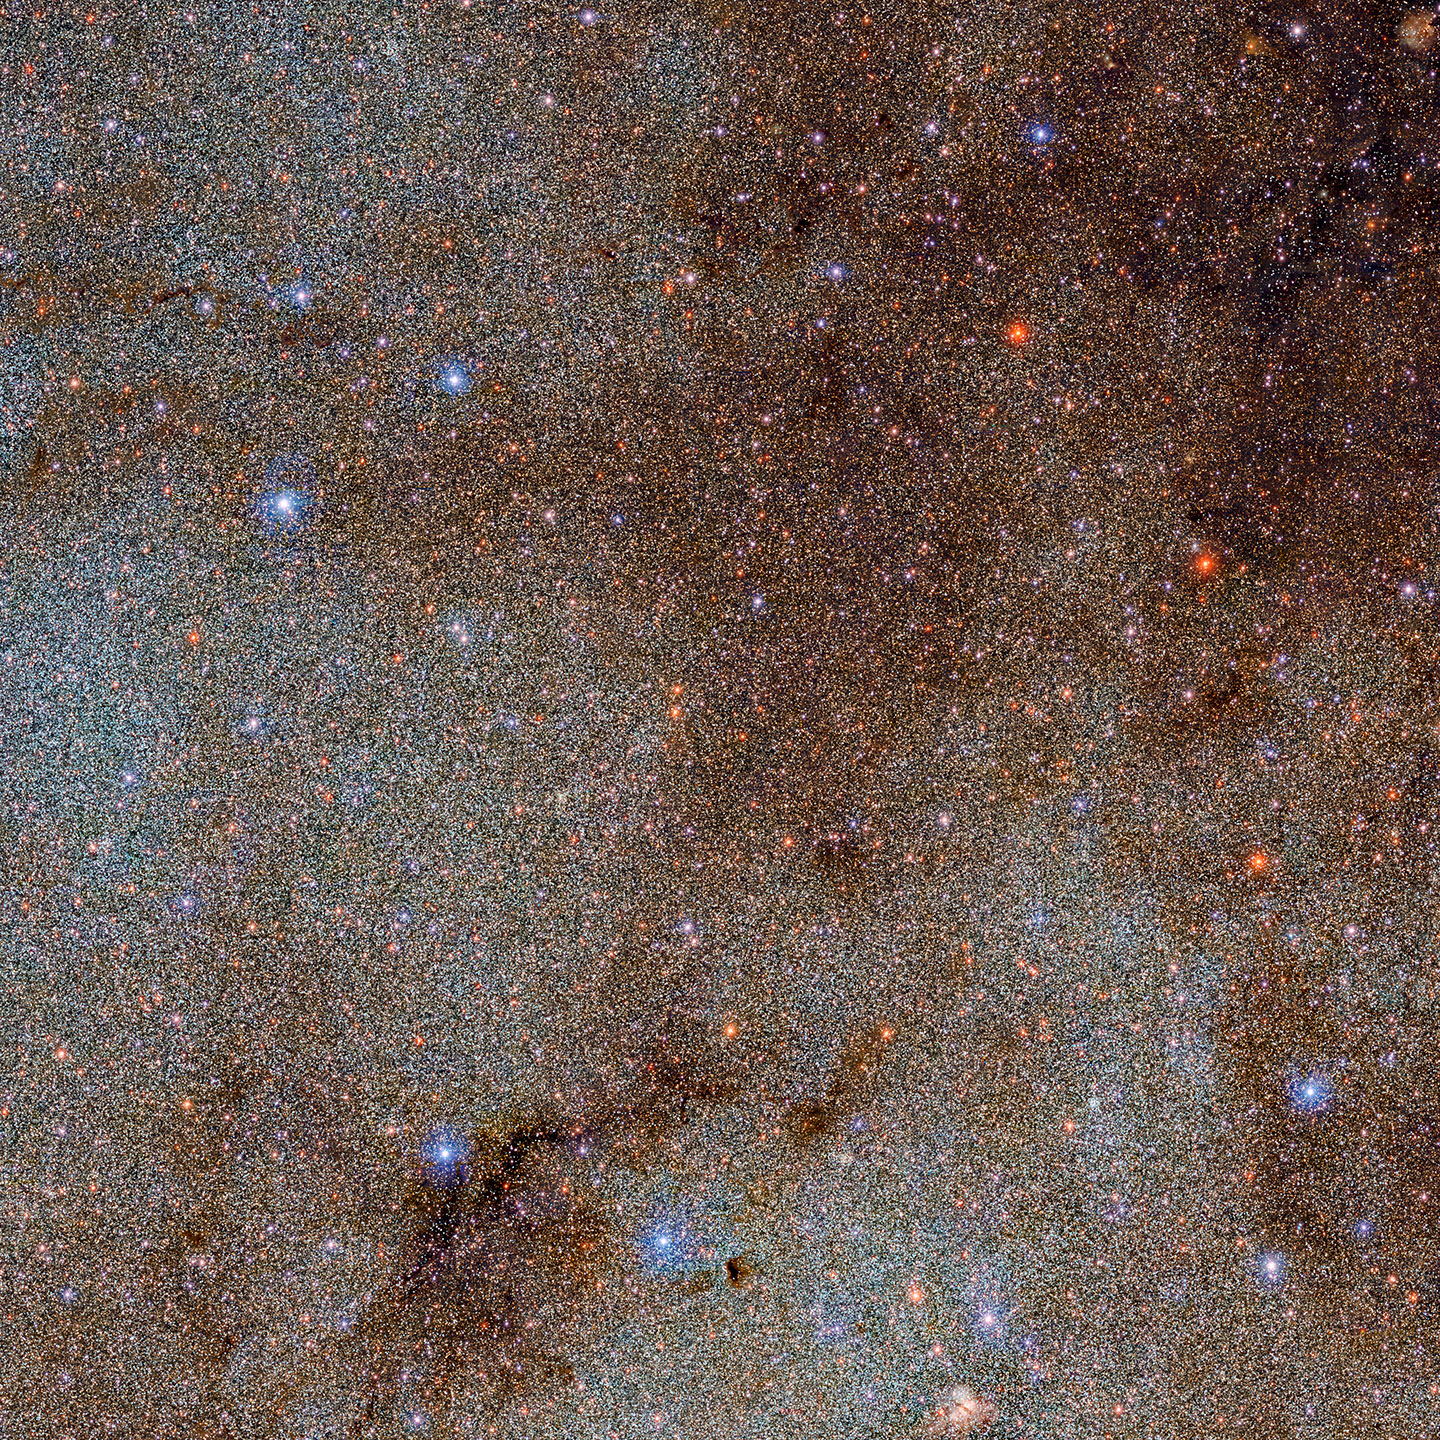 This image, which is brimming with stars and dark dust clouds, is a small extract — a mere pinprick — of the full Dark Energy Camera Plane Survey (DECaPS2) of the Milky Way. The new dataset contains a staggering 3.32 billion celestial objects — arguably the largest such catalog so far.